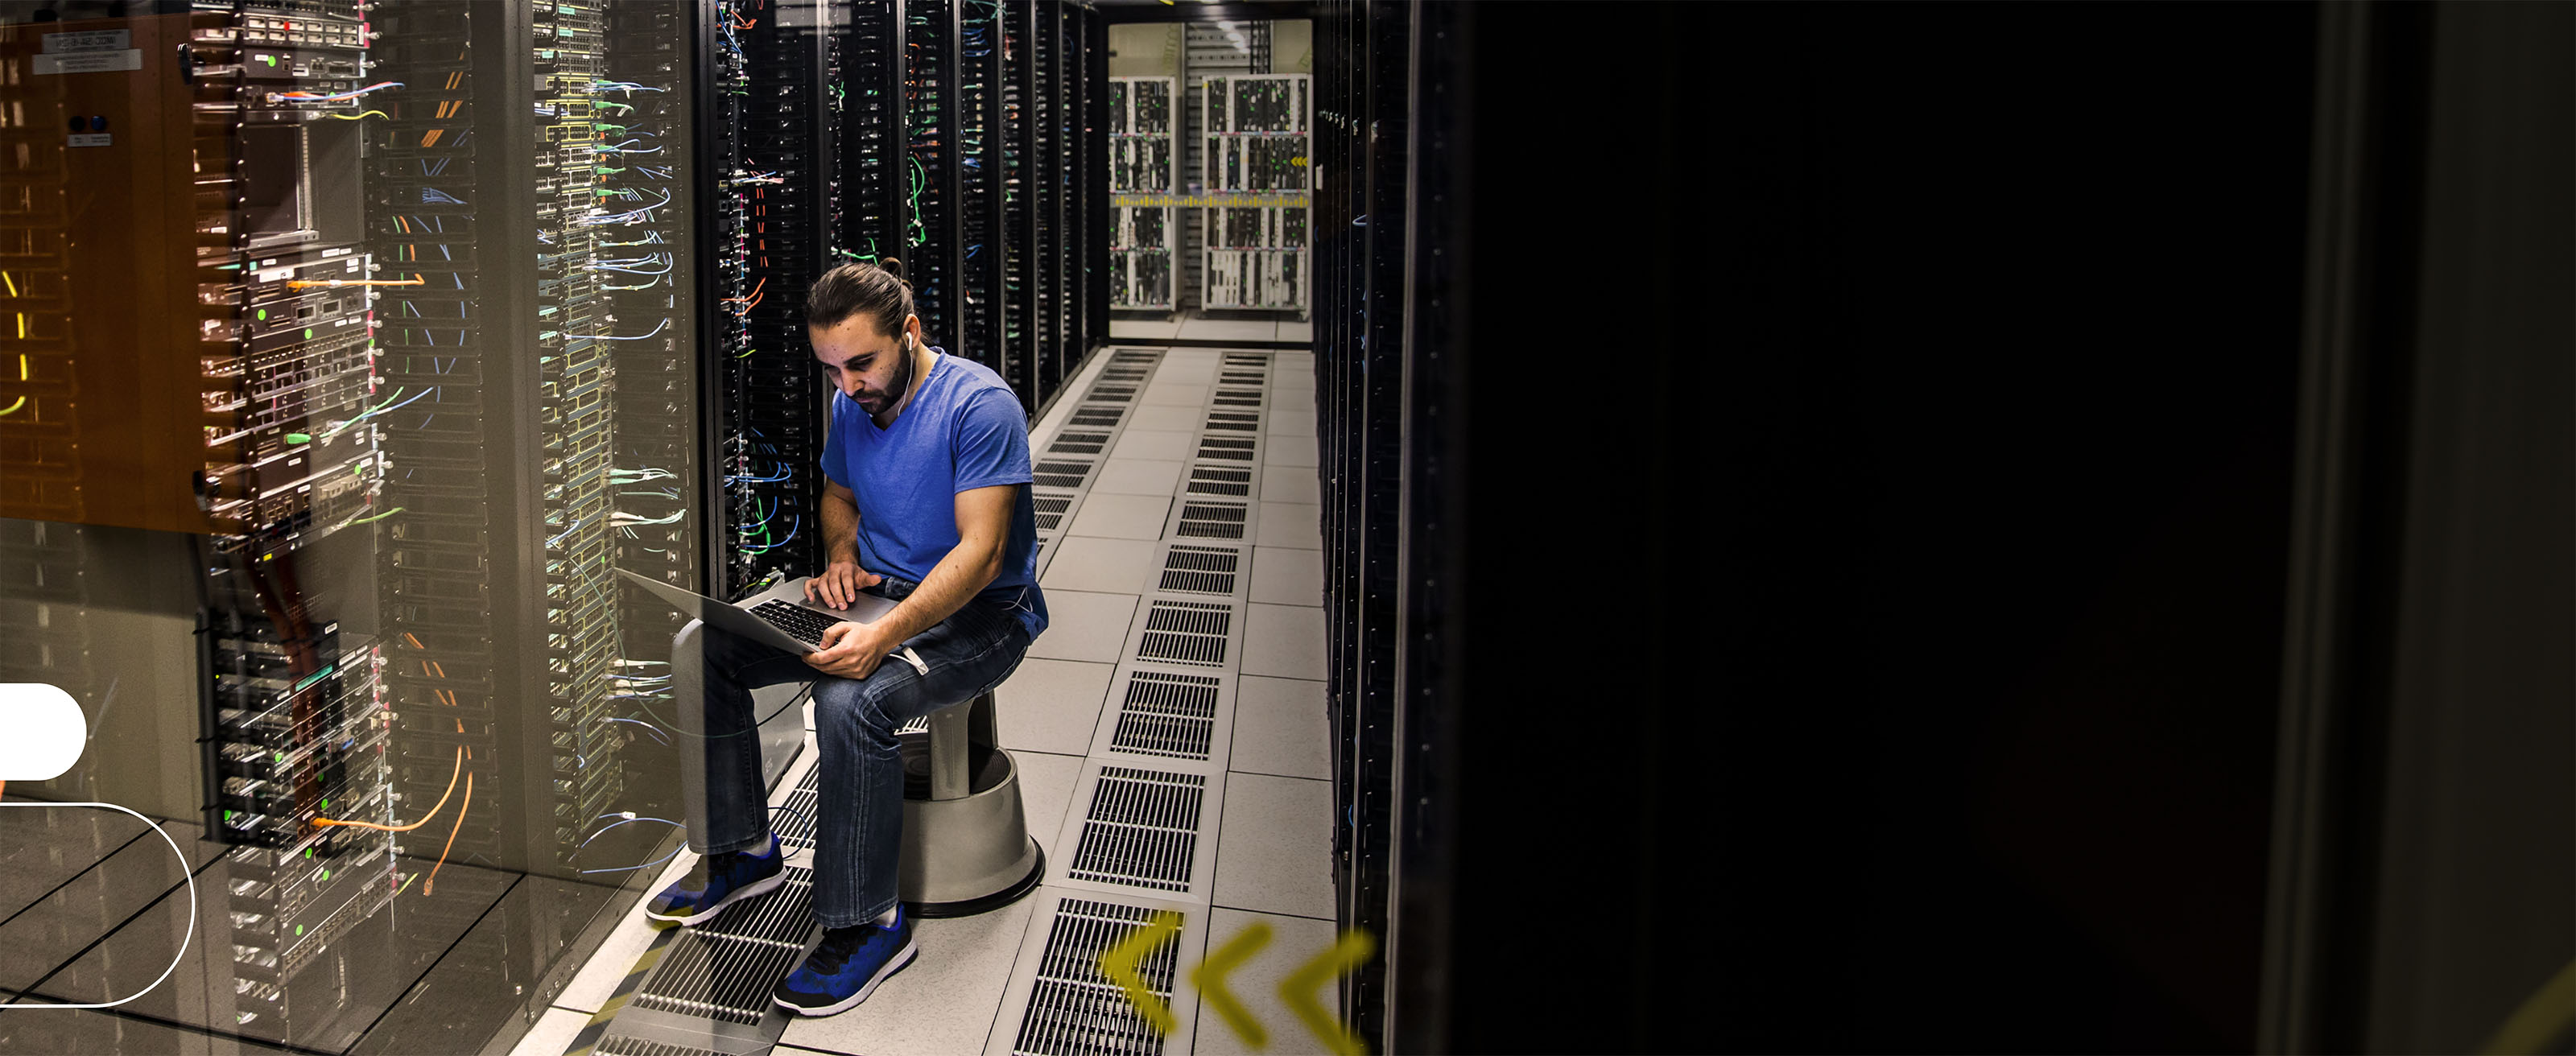 Certifiy your know-how to implement core data center technologies including network, compute, storage, automation, and security. Be the data center networking go-to expert with the Cisco Certified Network Professional (CCNP) Data Center certification.